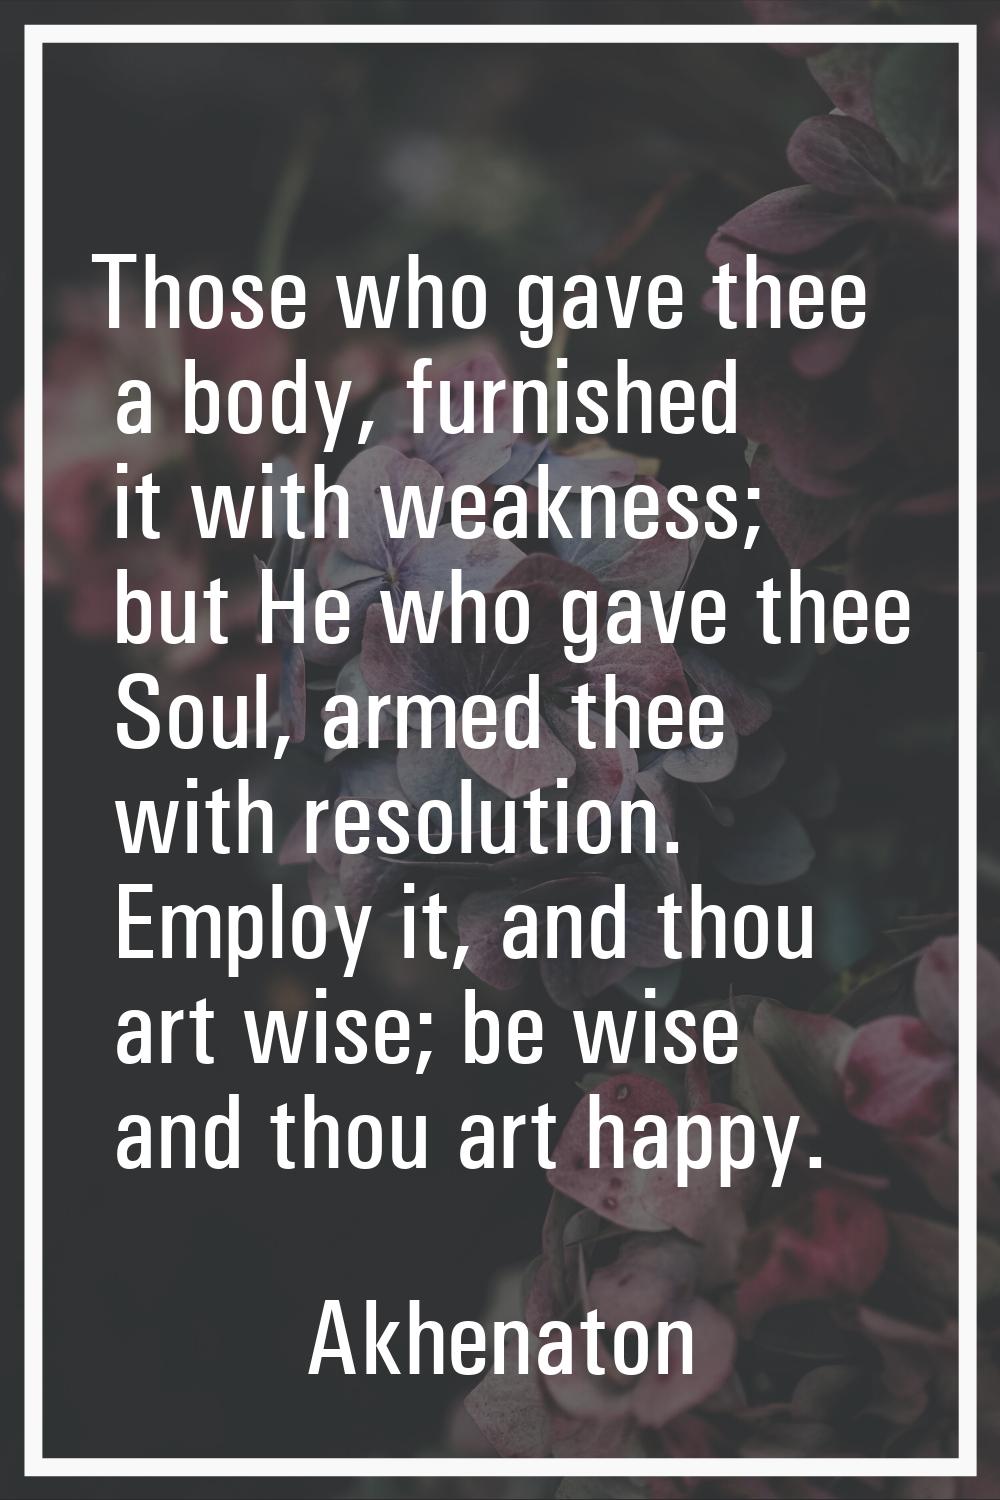 Those who gave thee a body, furnished it with weakness; but He who gave thee Soul, armed thee with 